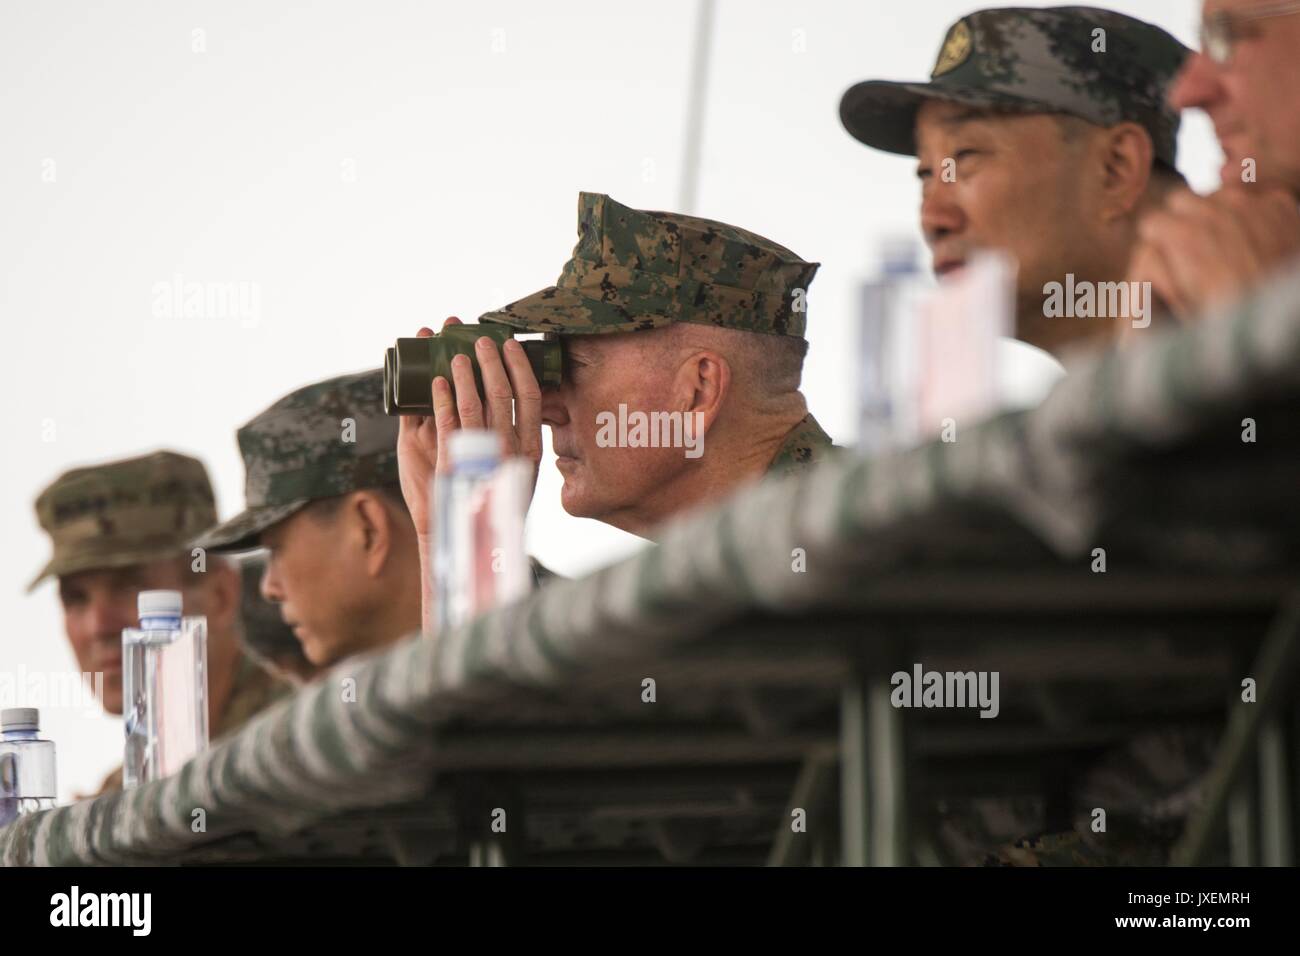 Haichung, China. 16th Aug, 2017. U.S. Chairman of the Joint Chiefs Gen. Joseph Dunford observes People's Liberation Army soldiers during an attack exercise at the Chinese Northern Theater Command Army Force Haichung Camp August 16, 2017 in Haichung, China. Dunford told Chinese leaders that the U.S. hoped diplomatic and economic pressure would convince North Korea to end its nuclear program, but that it was also preparing military options. Credit: Planetpix/Alamy Live News Stock Photo